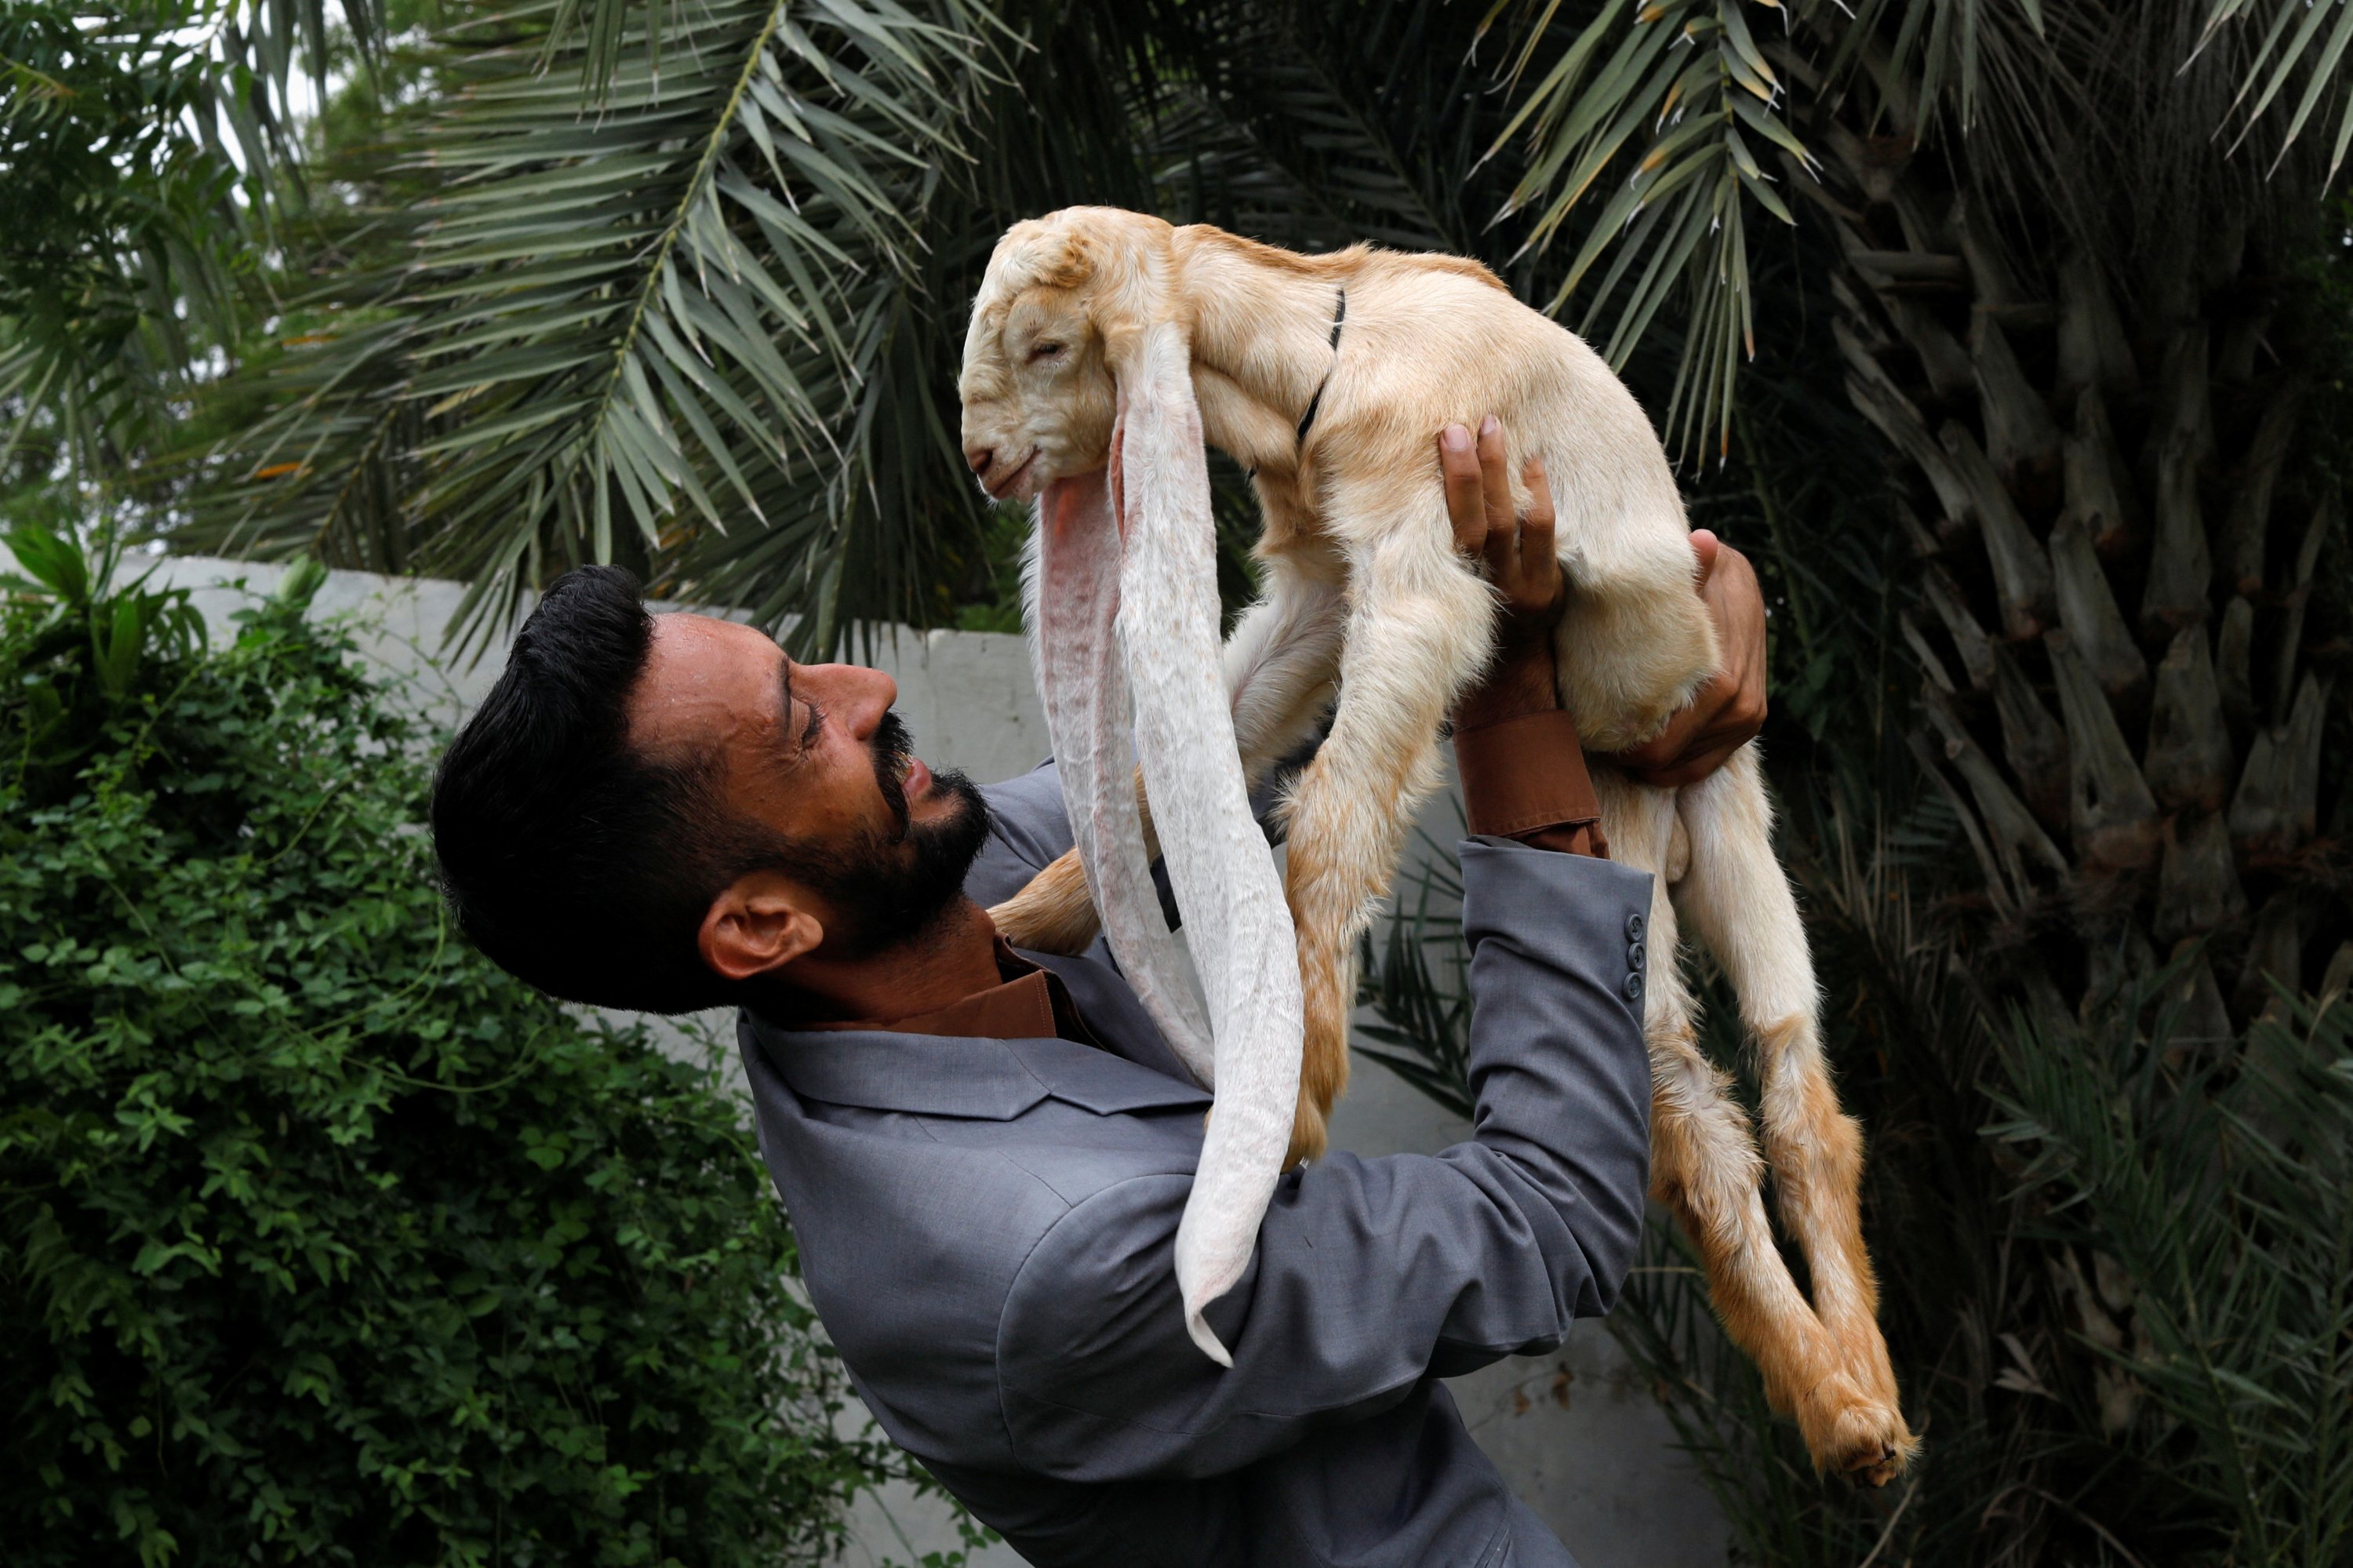 Long-eared baby goat 'Simba' thrills fans in Pakistan | Daily Sabah